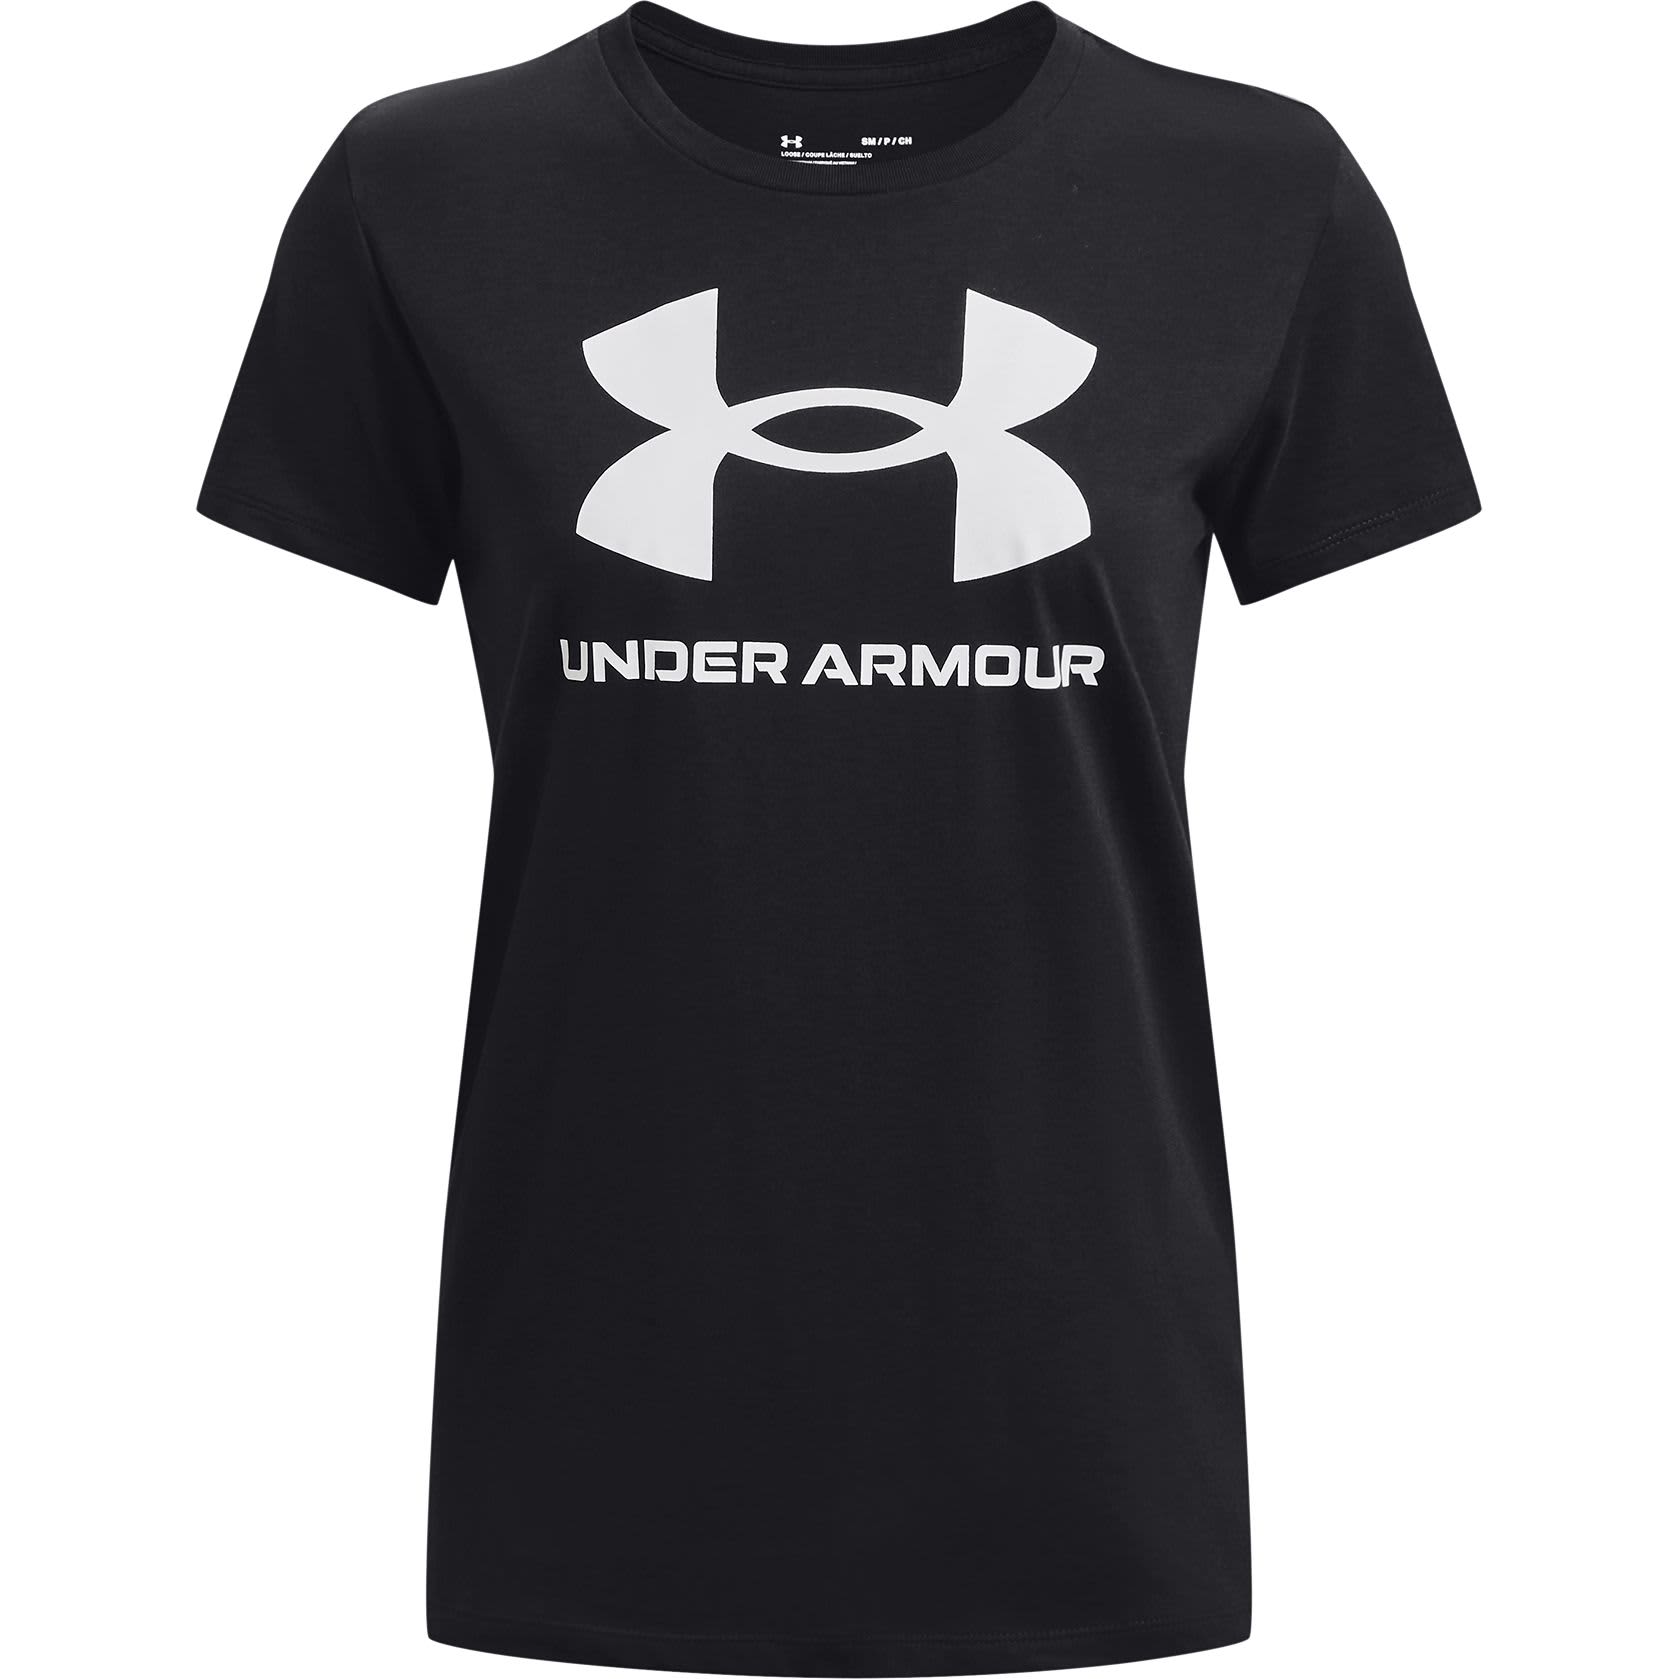 Under Armour® Women’s Live Sportstyle Graphic Short-Sleeve T-Shirt